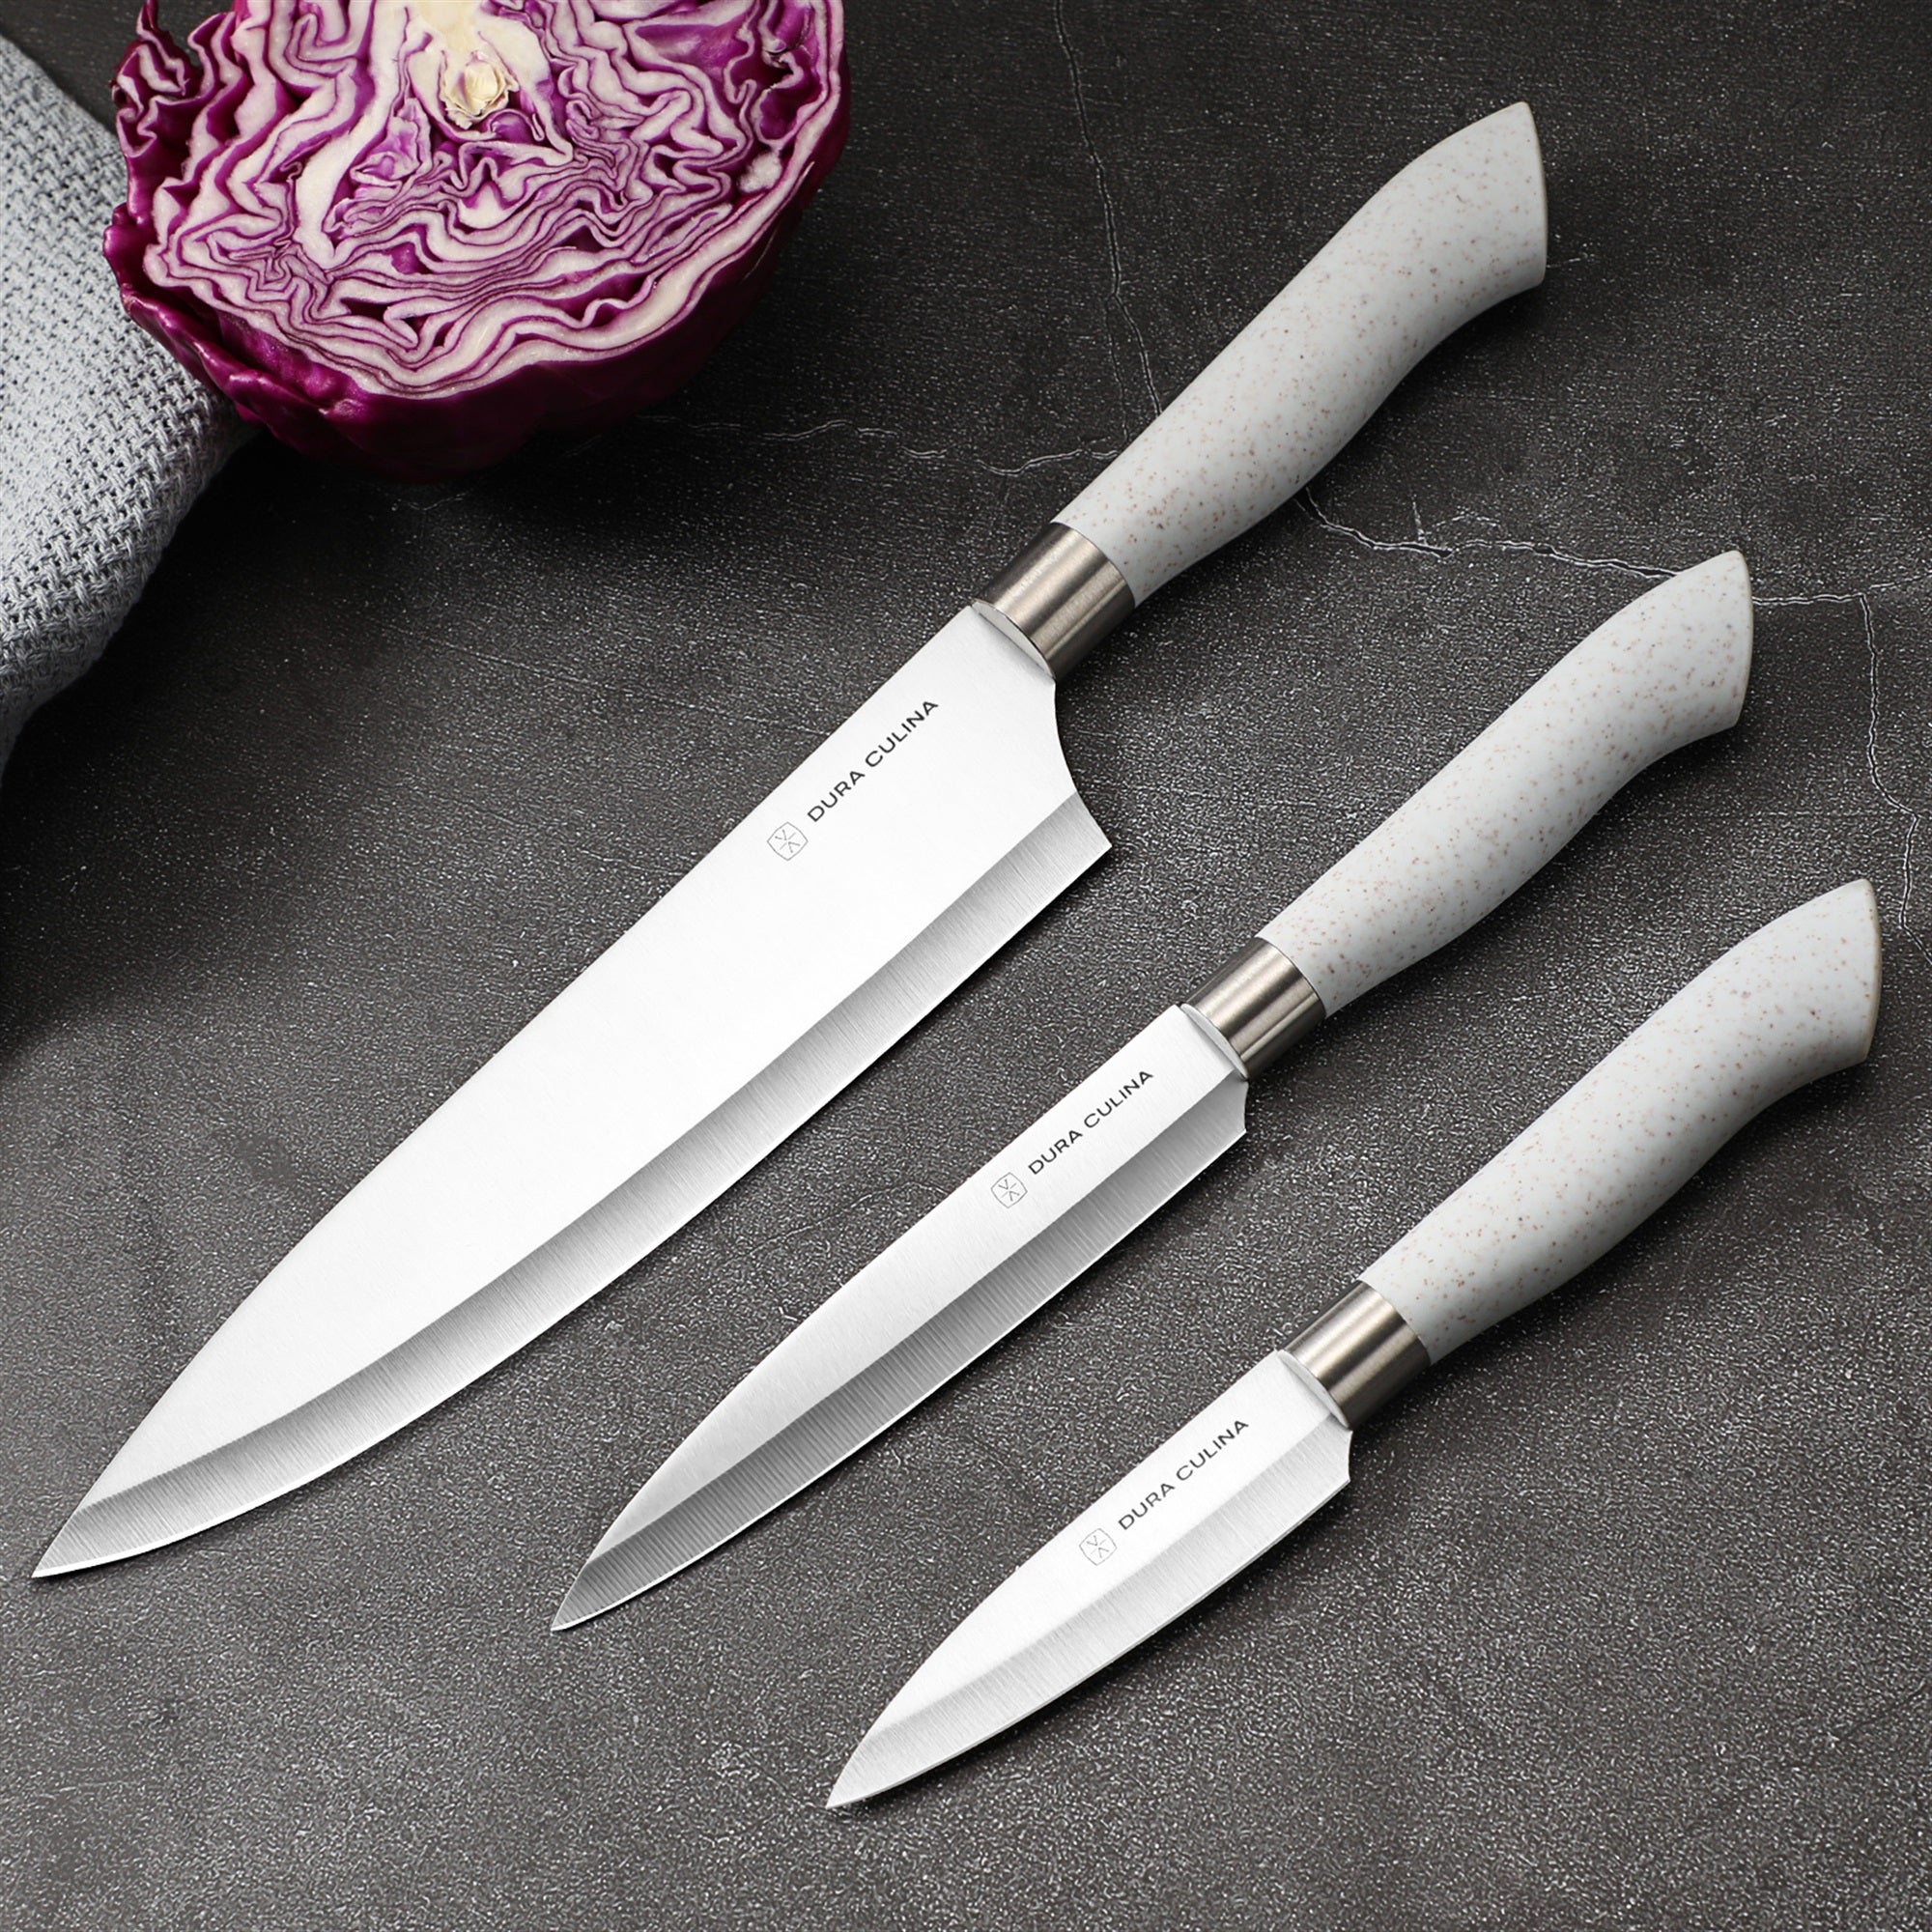 EcoCut 3 Piece Kitchen Knife Set With Blade Guards, Grey